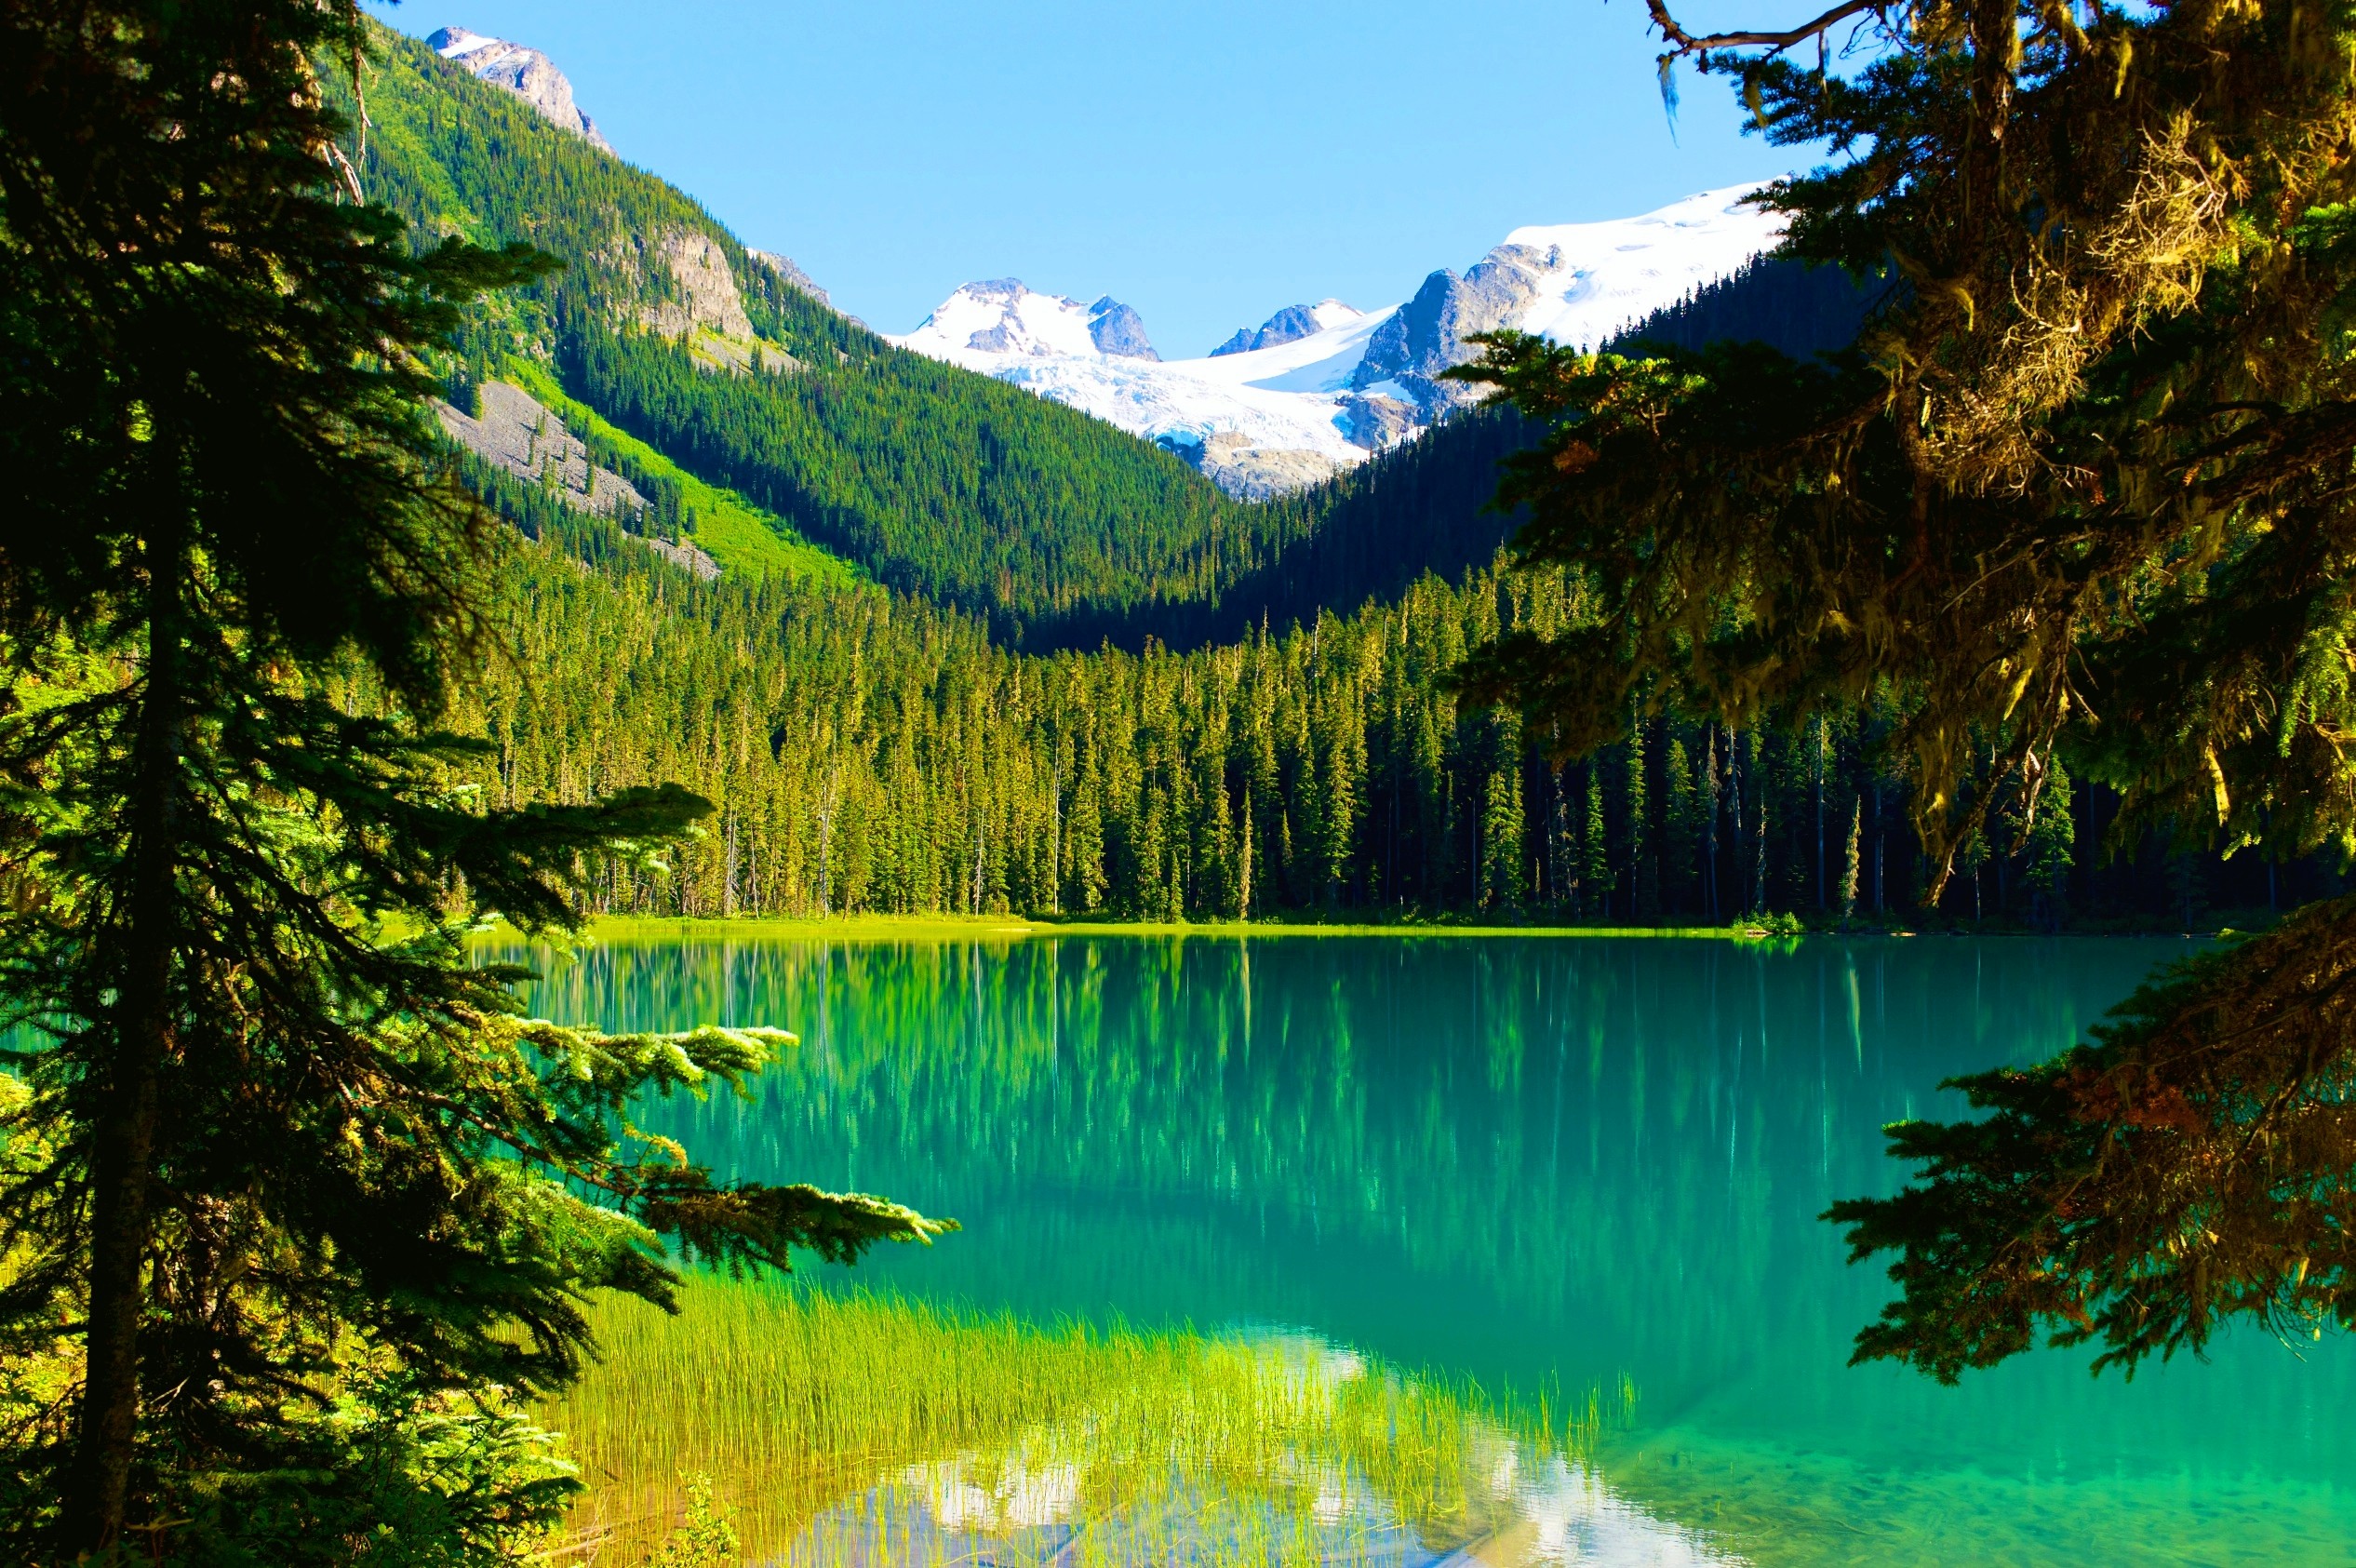 Nature Landscape Trees Lake Mountains Forest Summer Water Snowy Peak British Columbia Canada Reflect 2532x1685